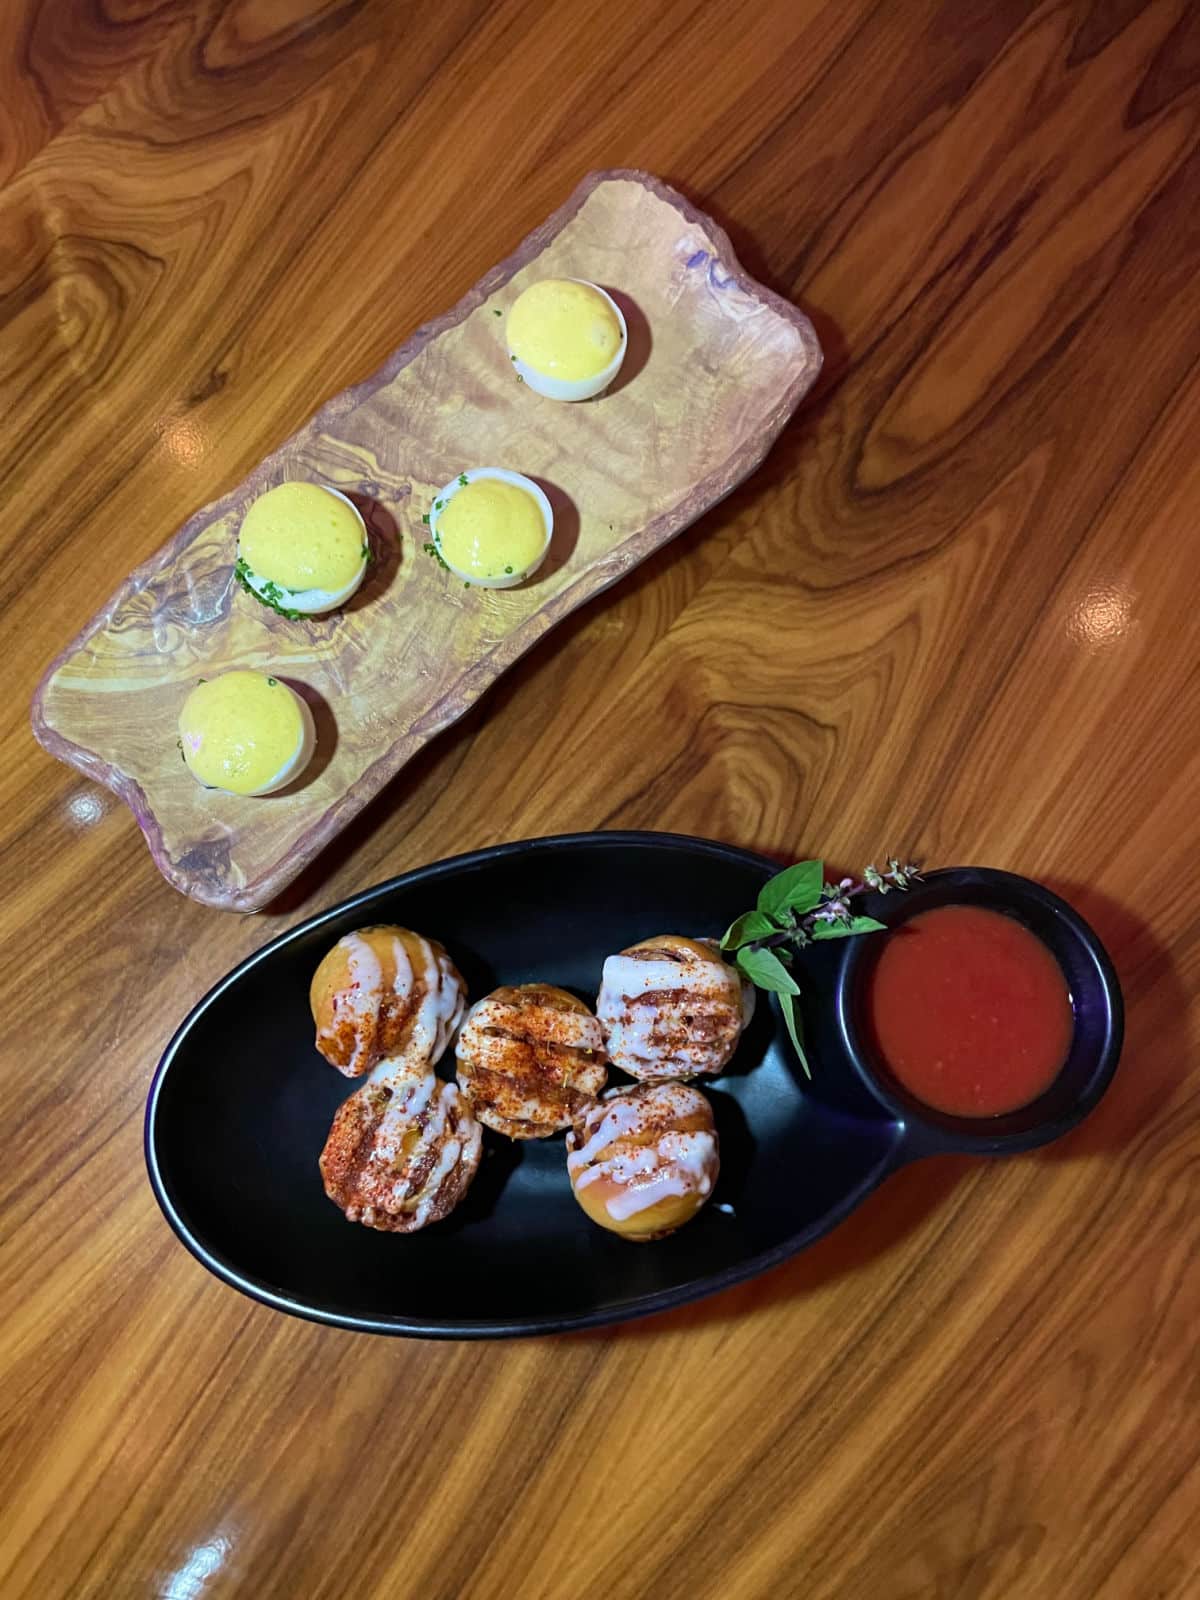 Deviled eggs and dough bites from Retro.